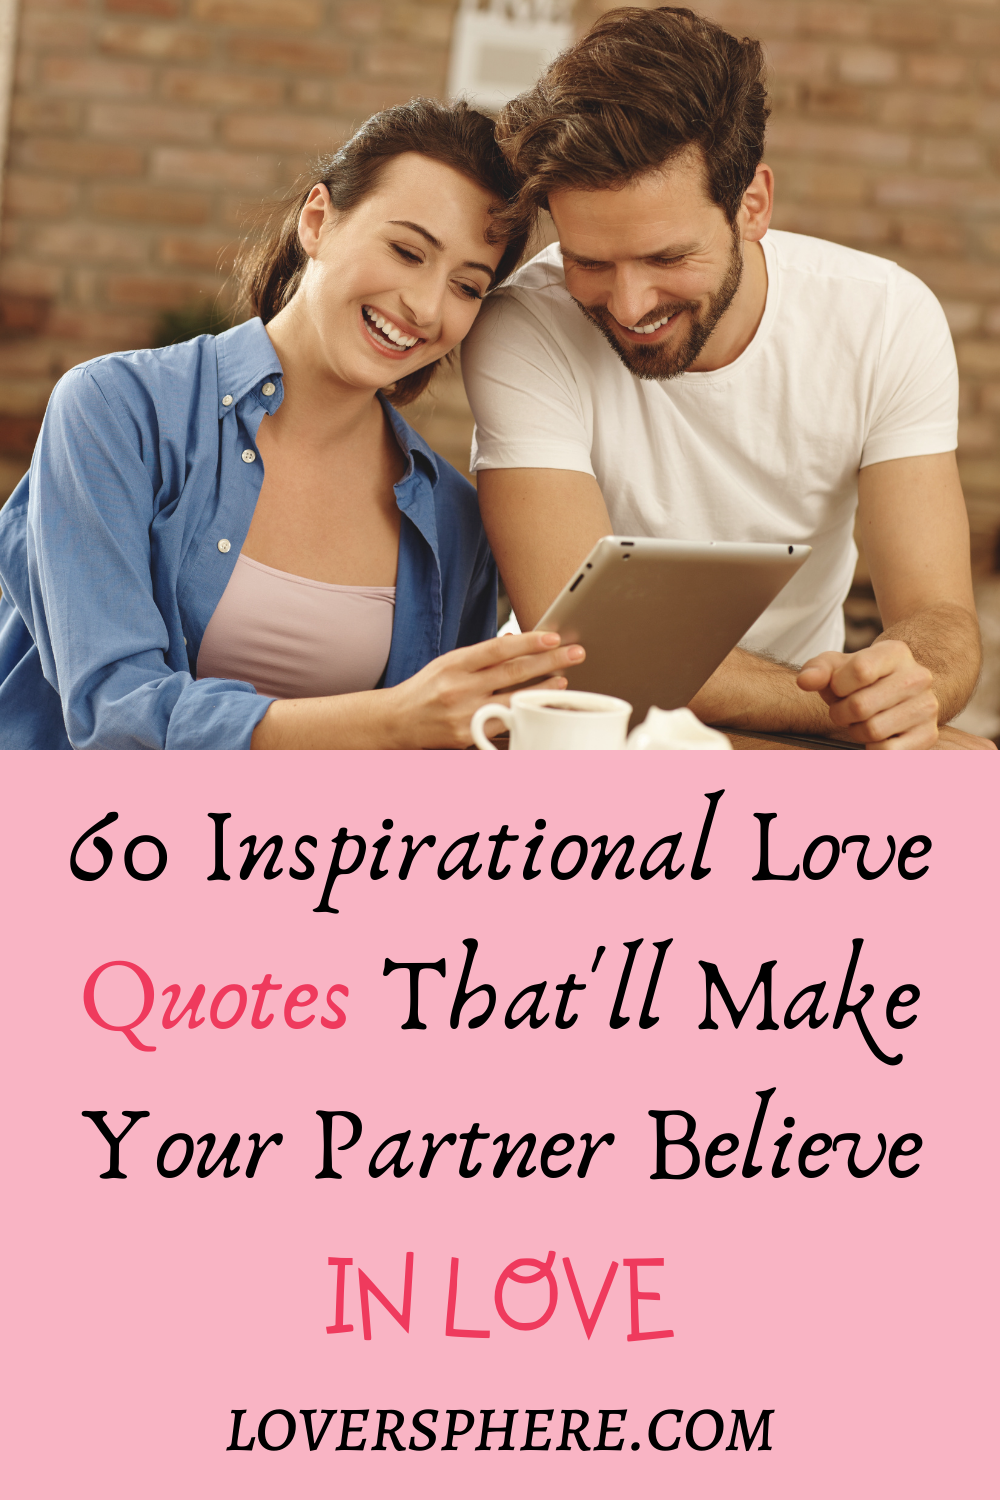 Inspirational Love Quotes For Your Spouse